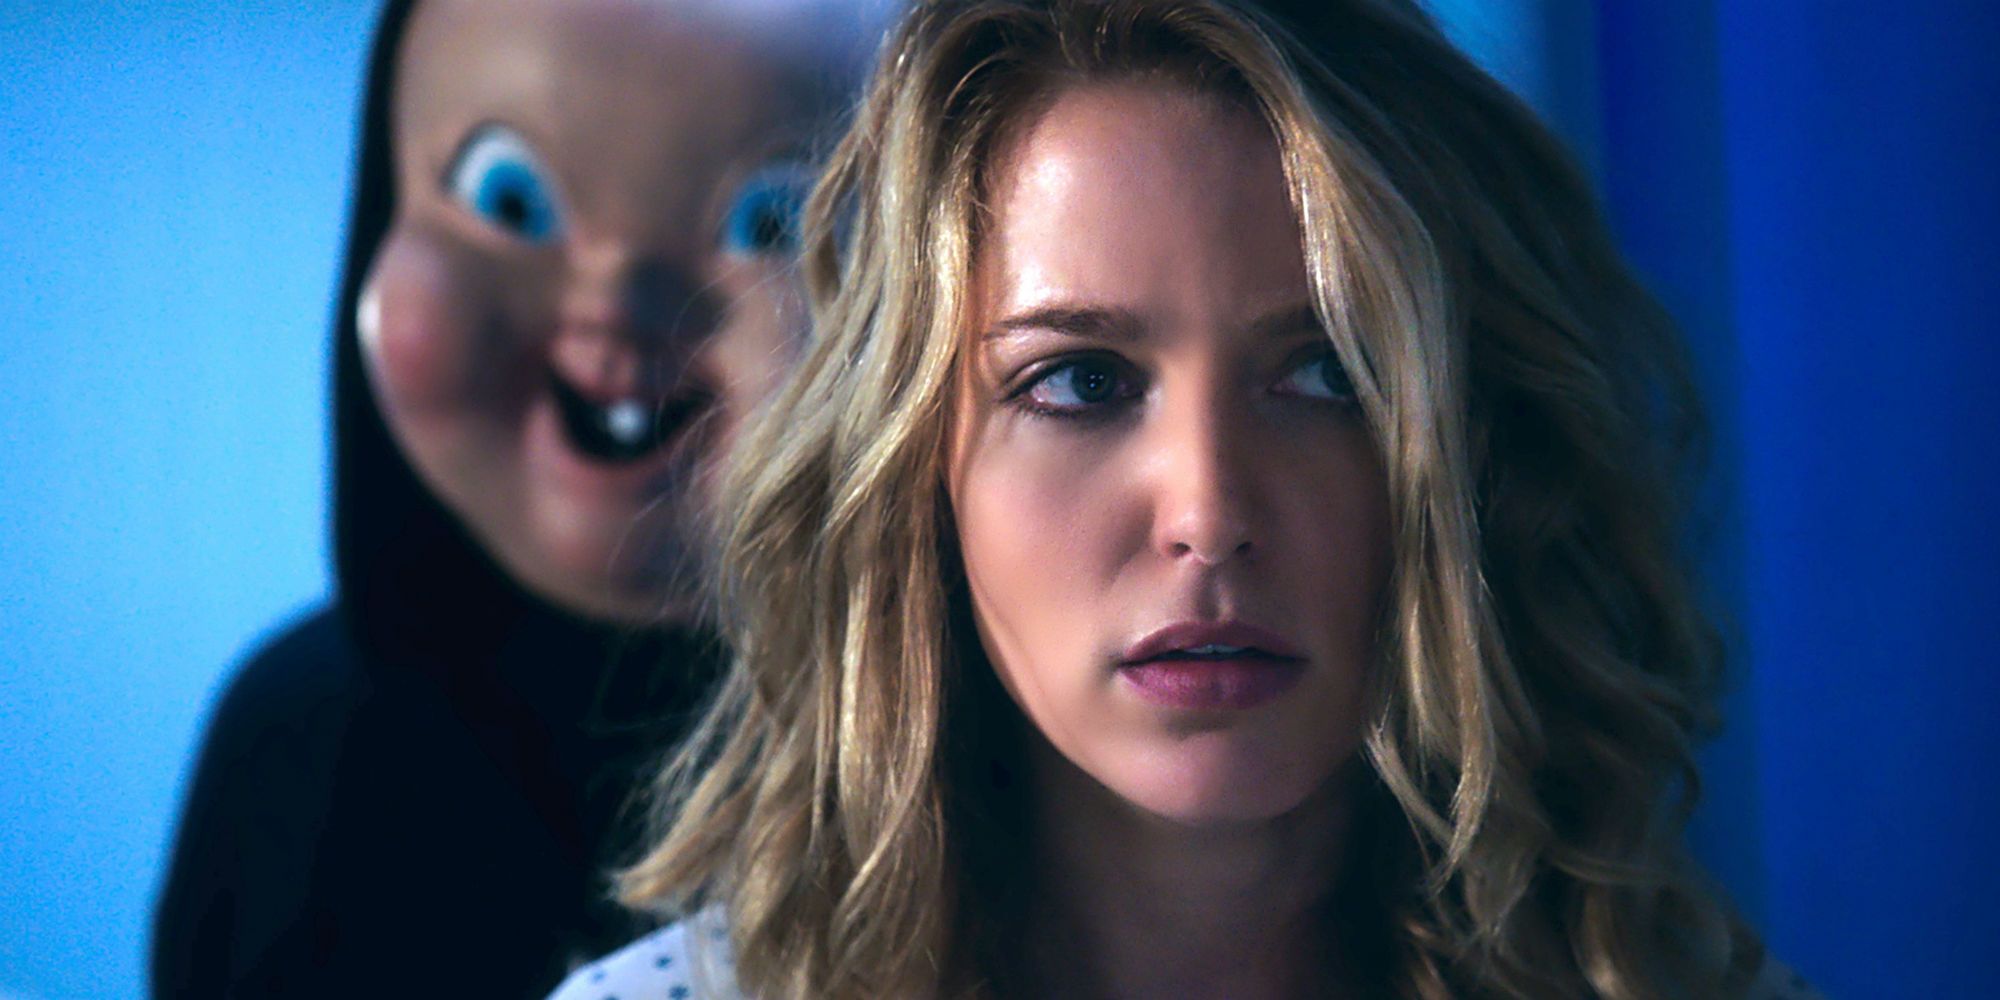 The Killer stands behind an unsuspecting Tree in Happy Death Day.